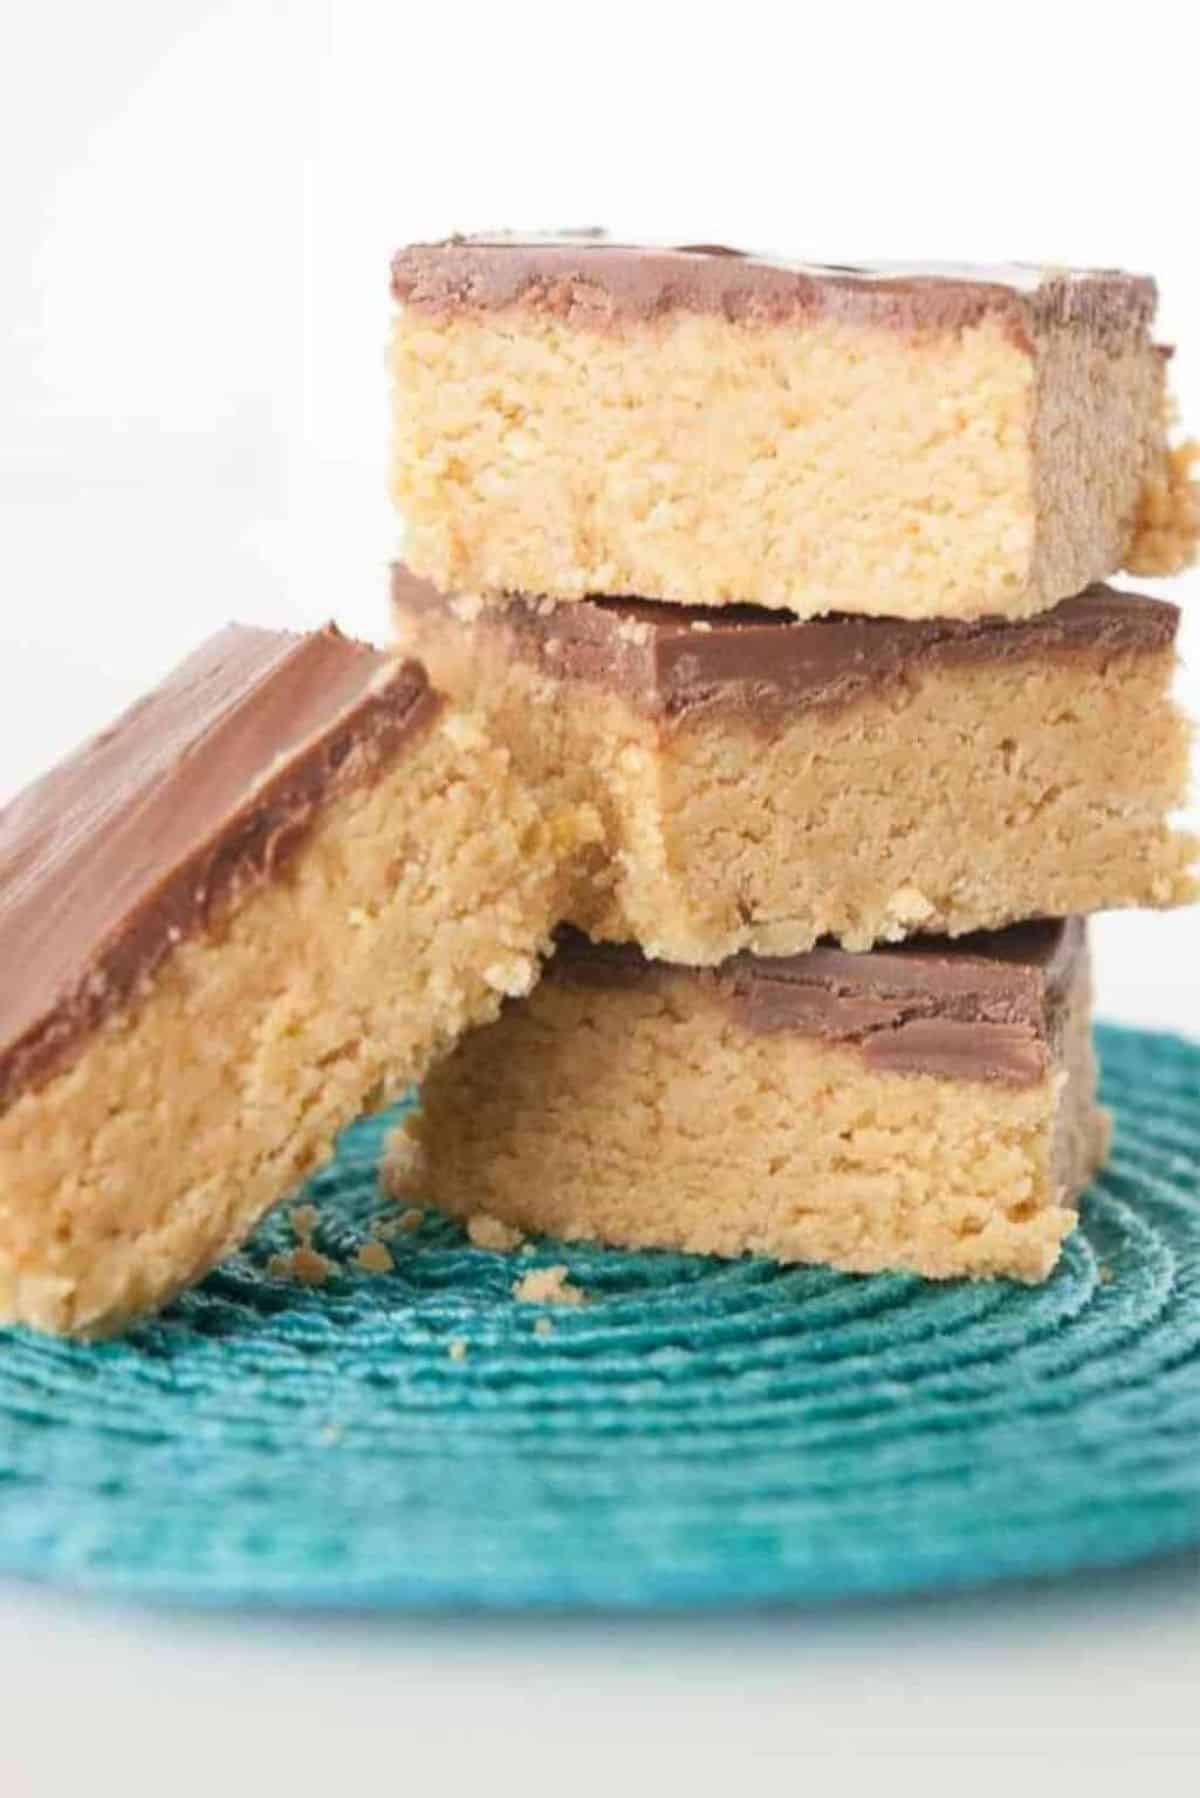 A pile of 5 Ingredient No-Bake Peanut Butter Bars on a blue tray.